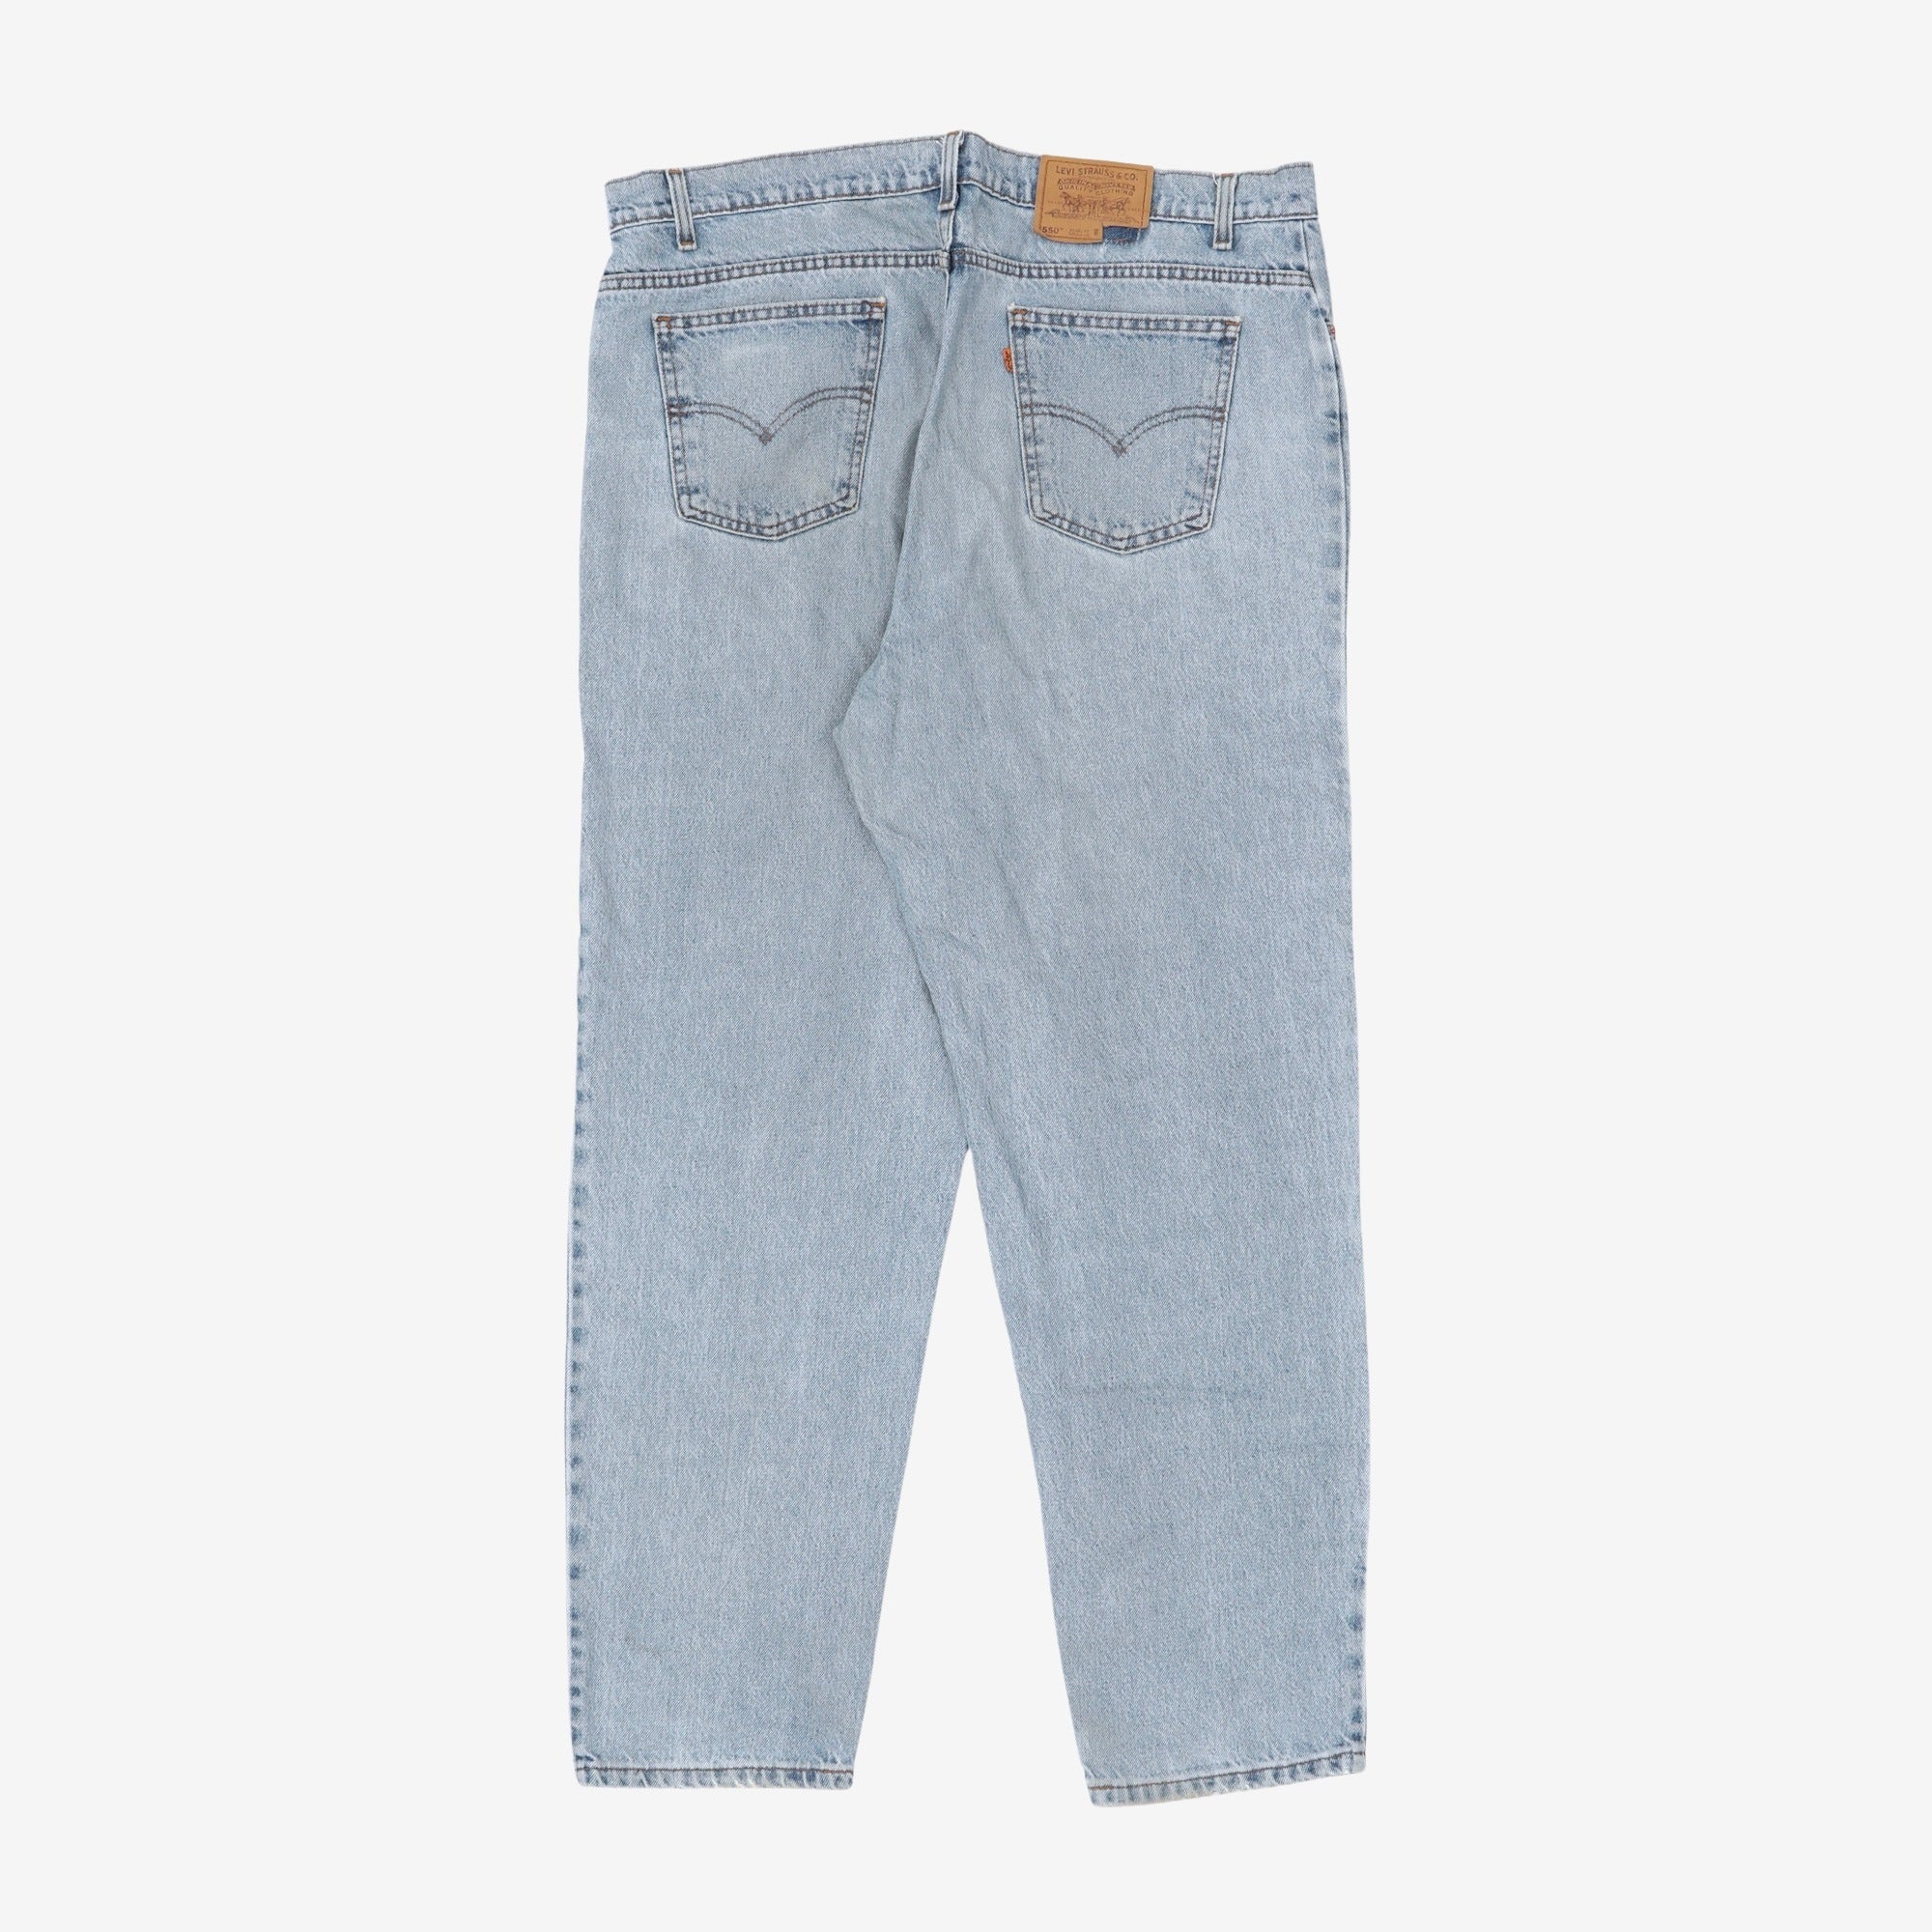 Lot 550 Relaxed Fit Denim